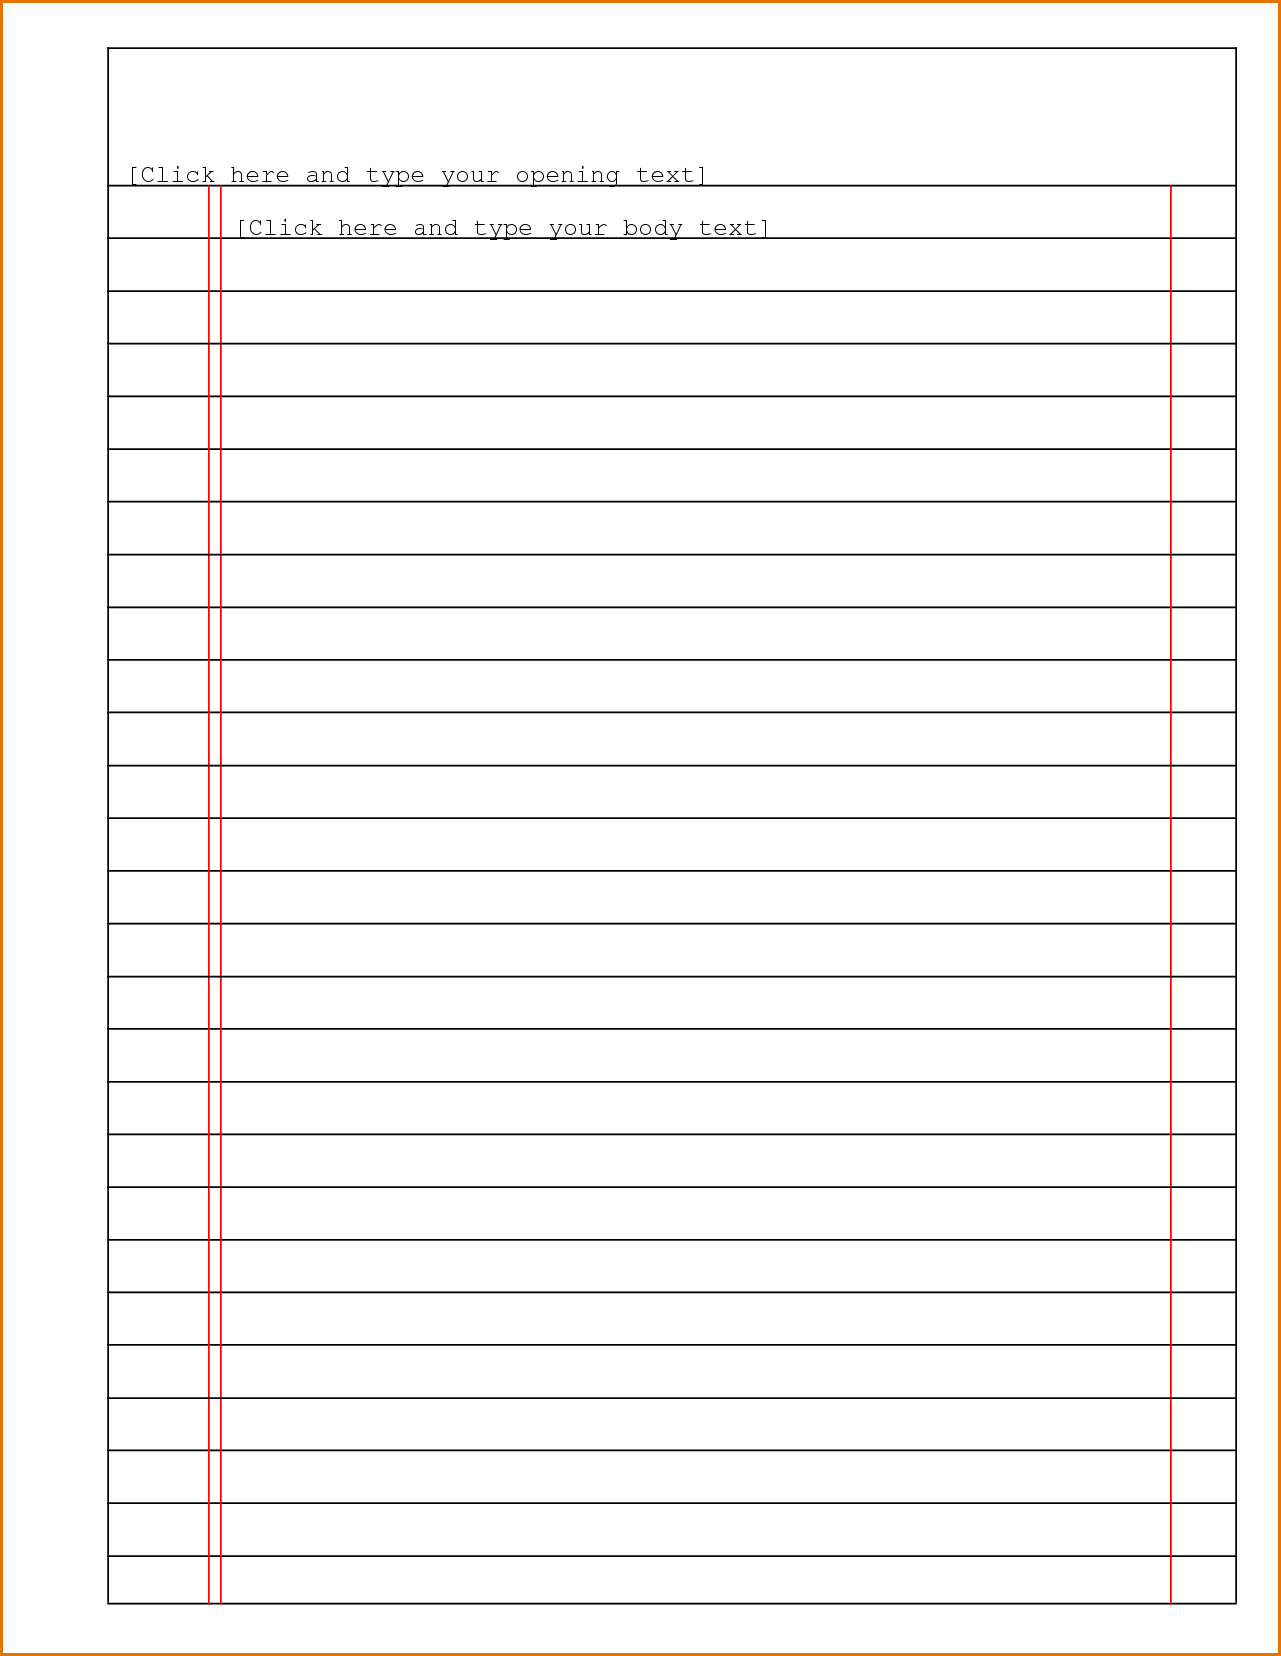 Make Lined Paper How To Make Google Docs Lined Paper For College Ruled Lined Paper Template Word 2007